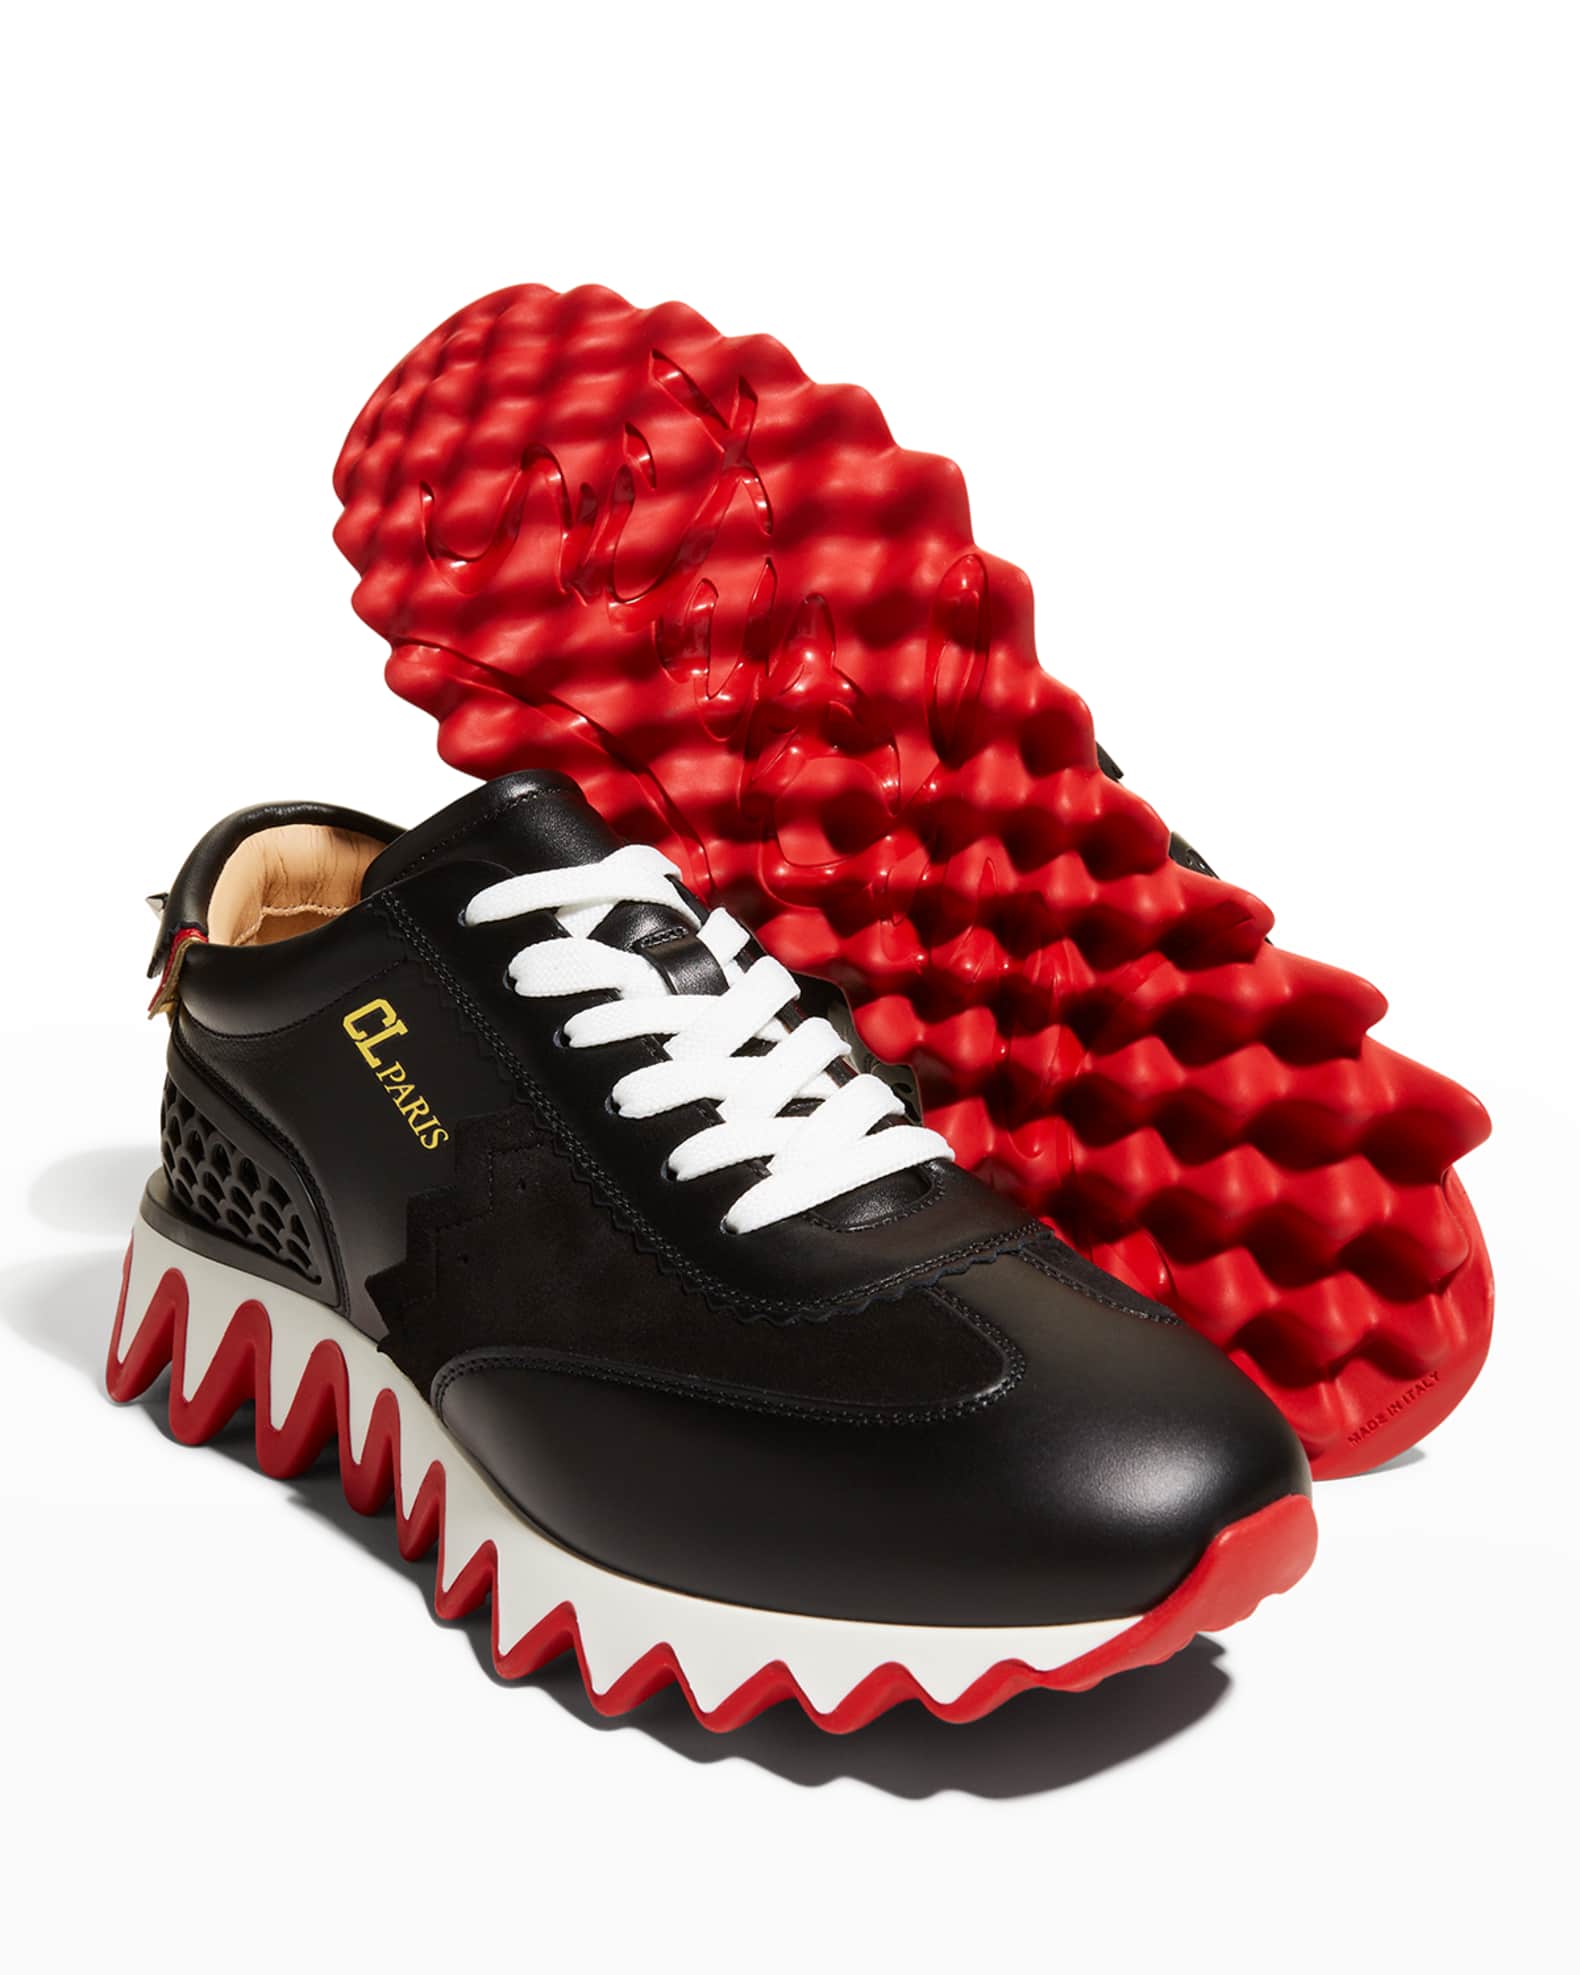 Christian Louboutin Loubishark Donna Leather Red Sole Runner Sneakers